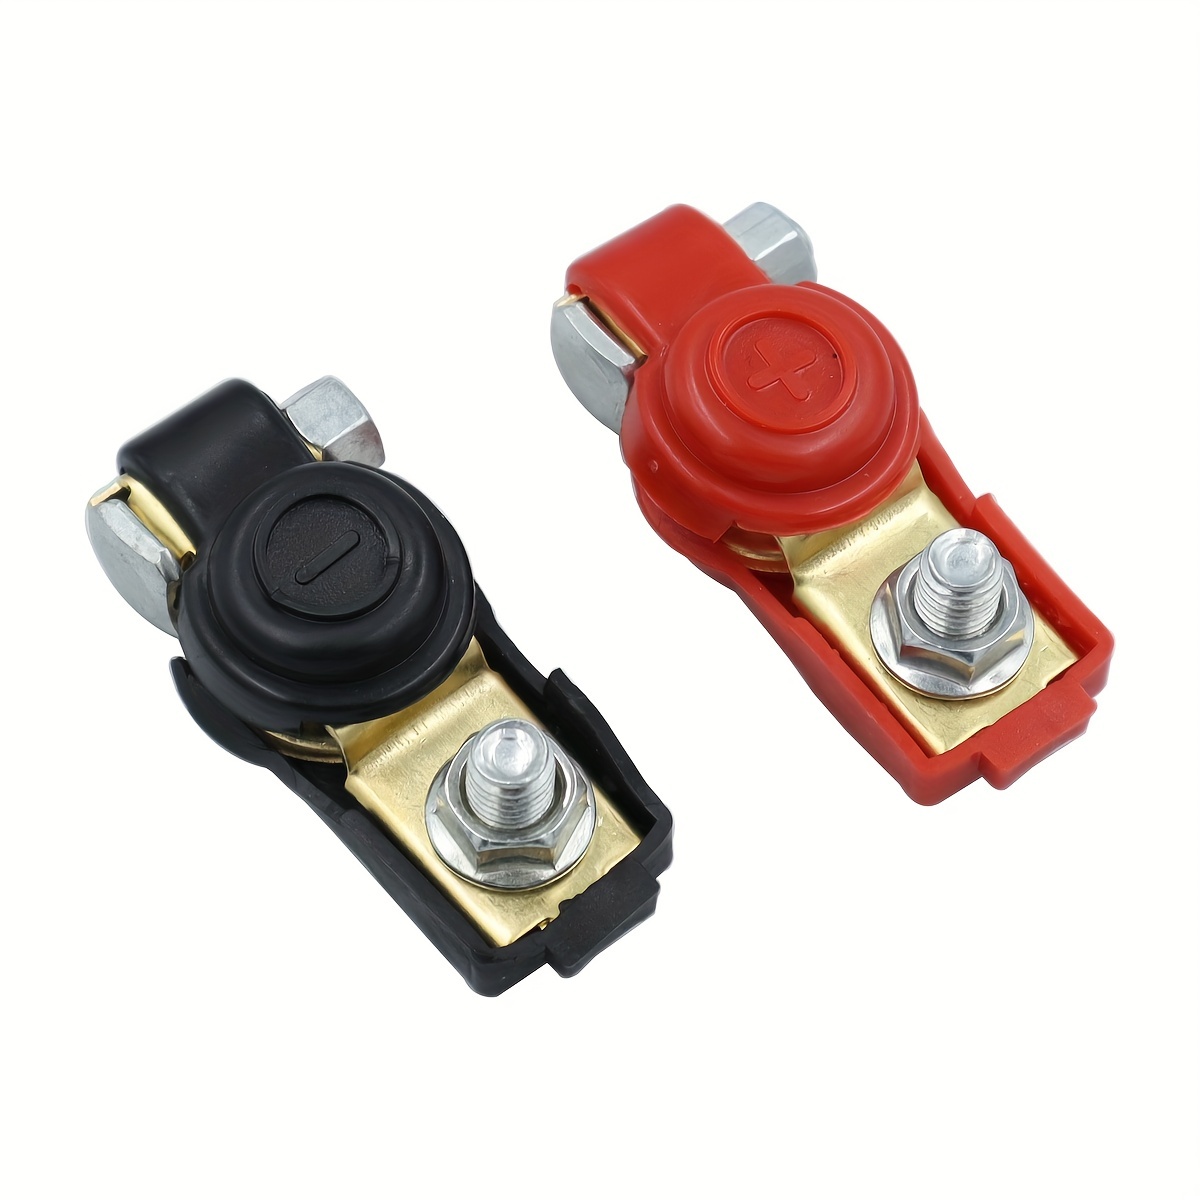 TKDMR 2Pairs Car Battery Cable Terminal Clamps-Connectors - Battery  Terminal with Plastice Cover,Good Contact,Corrosion Resistance,Applicated  in